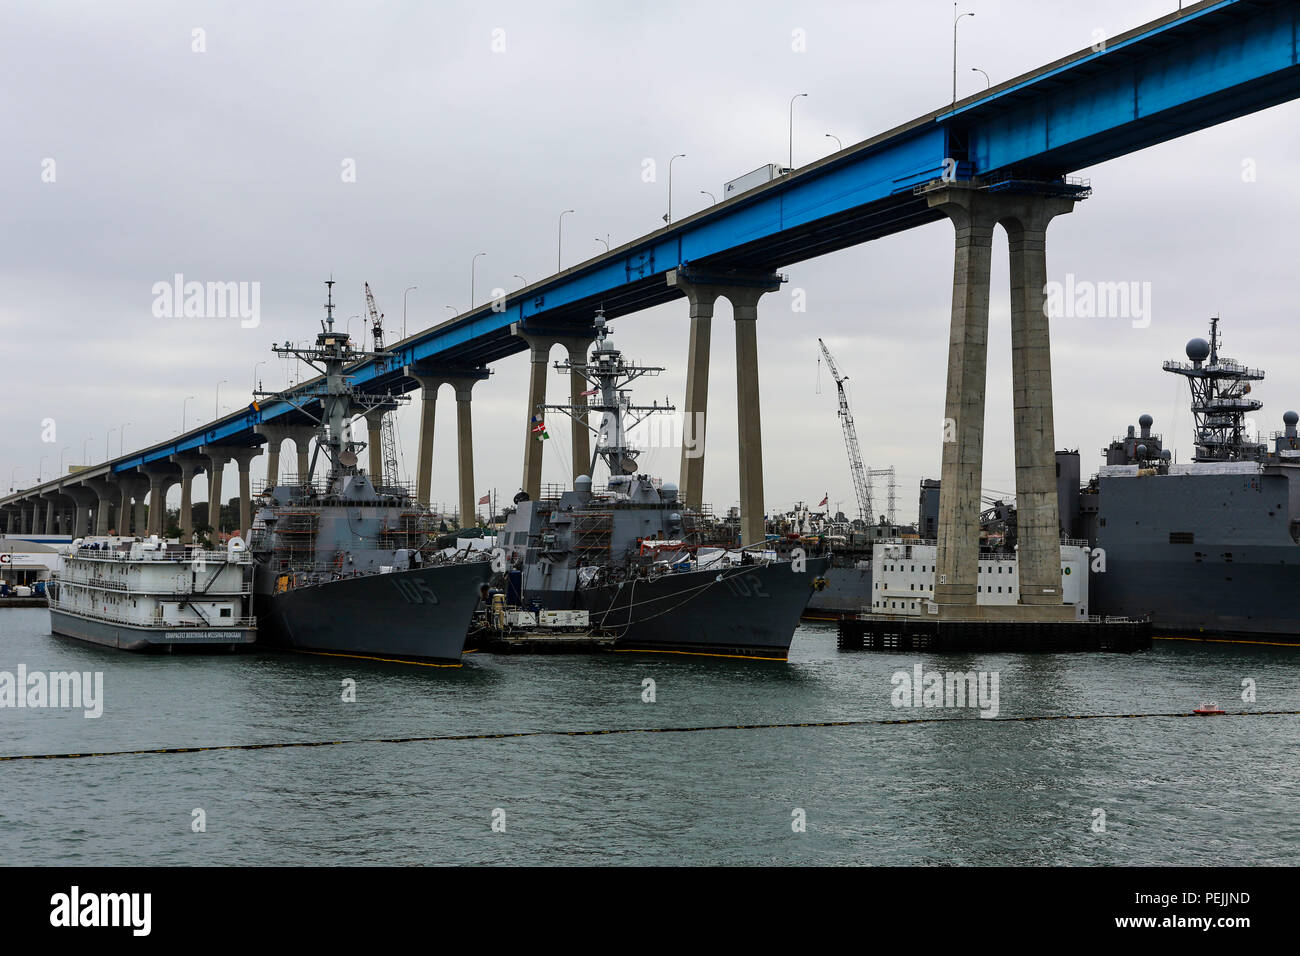 The amphibious assault ship USS Boxer (LHD 4) passes underneath the Coronado Bridge in San Diego, Calif., during Exercise Dawn Blitz 2015, Aug. 31, 2015. Dawn Blitz is a multinational amphibious training exercise designed to train Expeditionary Strike Group Three, 1st Marine Expeditionary Brigade and Coalition partners in the operations expected of an amphibious task force while also building U.S. and Coalition operational interoperability from the sea. (U.S. Marine Corps photo by Lance Cpl. April L. Price/Released) Stock Photo